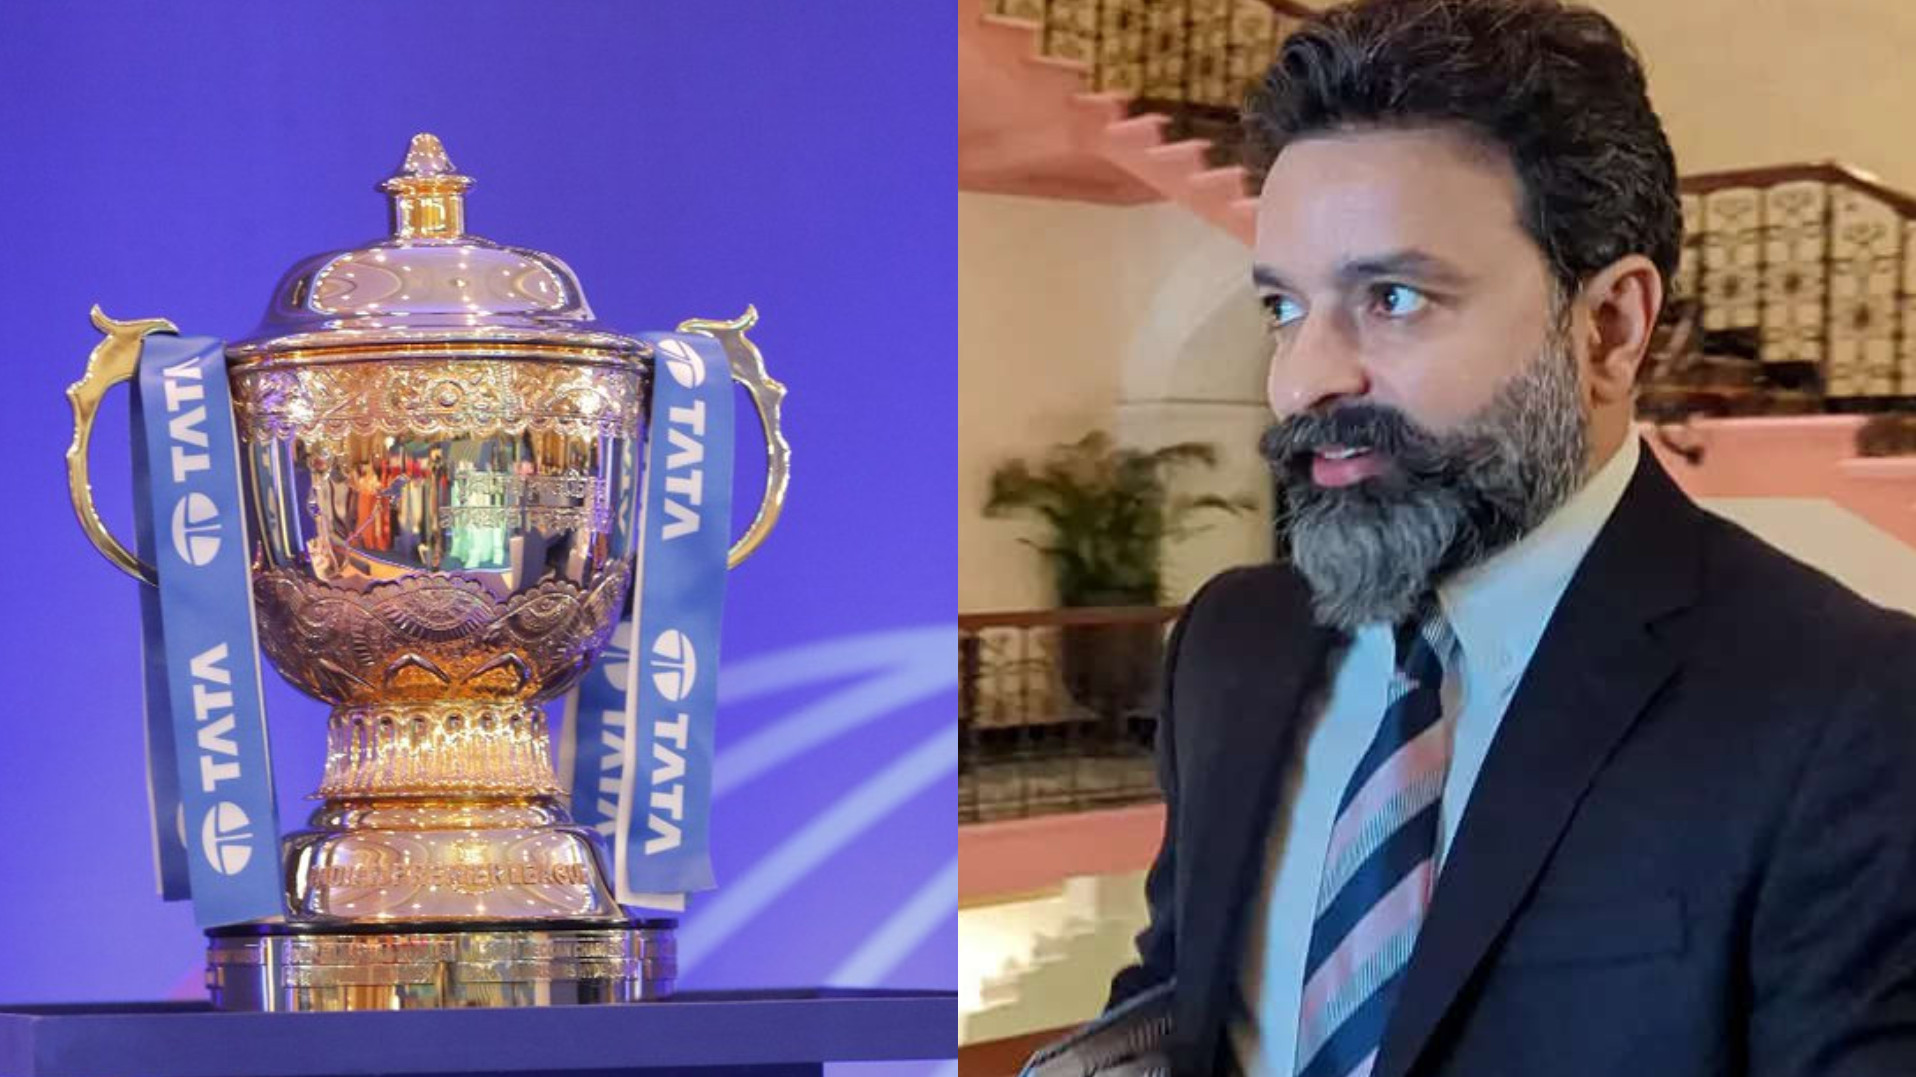 IPL to become world’s biggest sporting league; Indian players not allowed in foreign leagues- IPL chairman Arun Dhumal